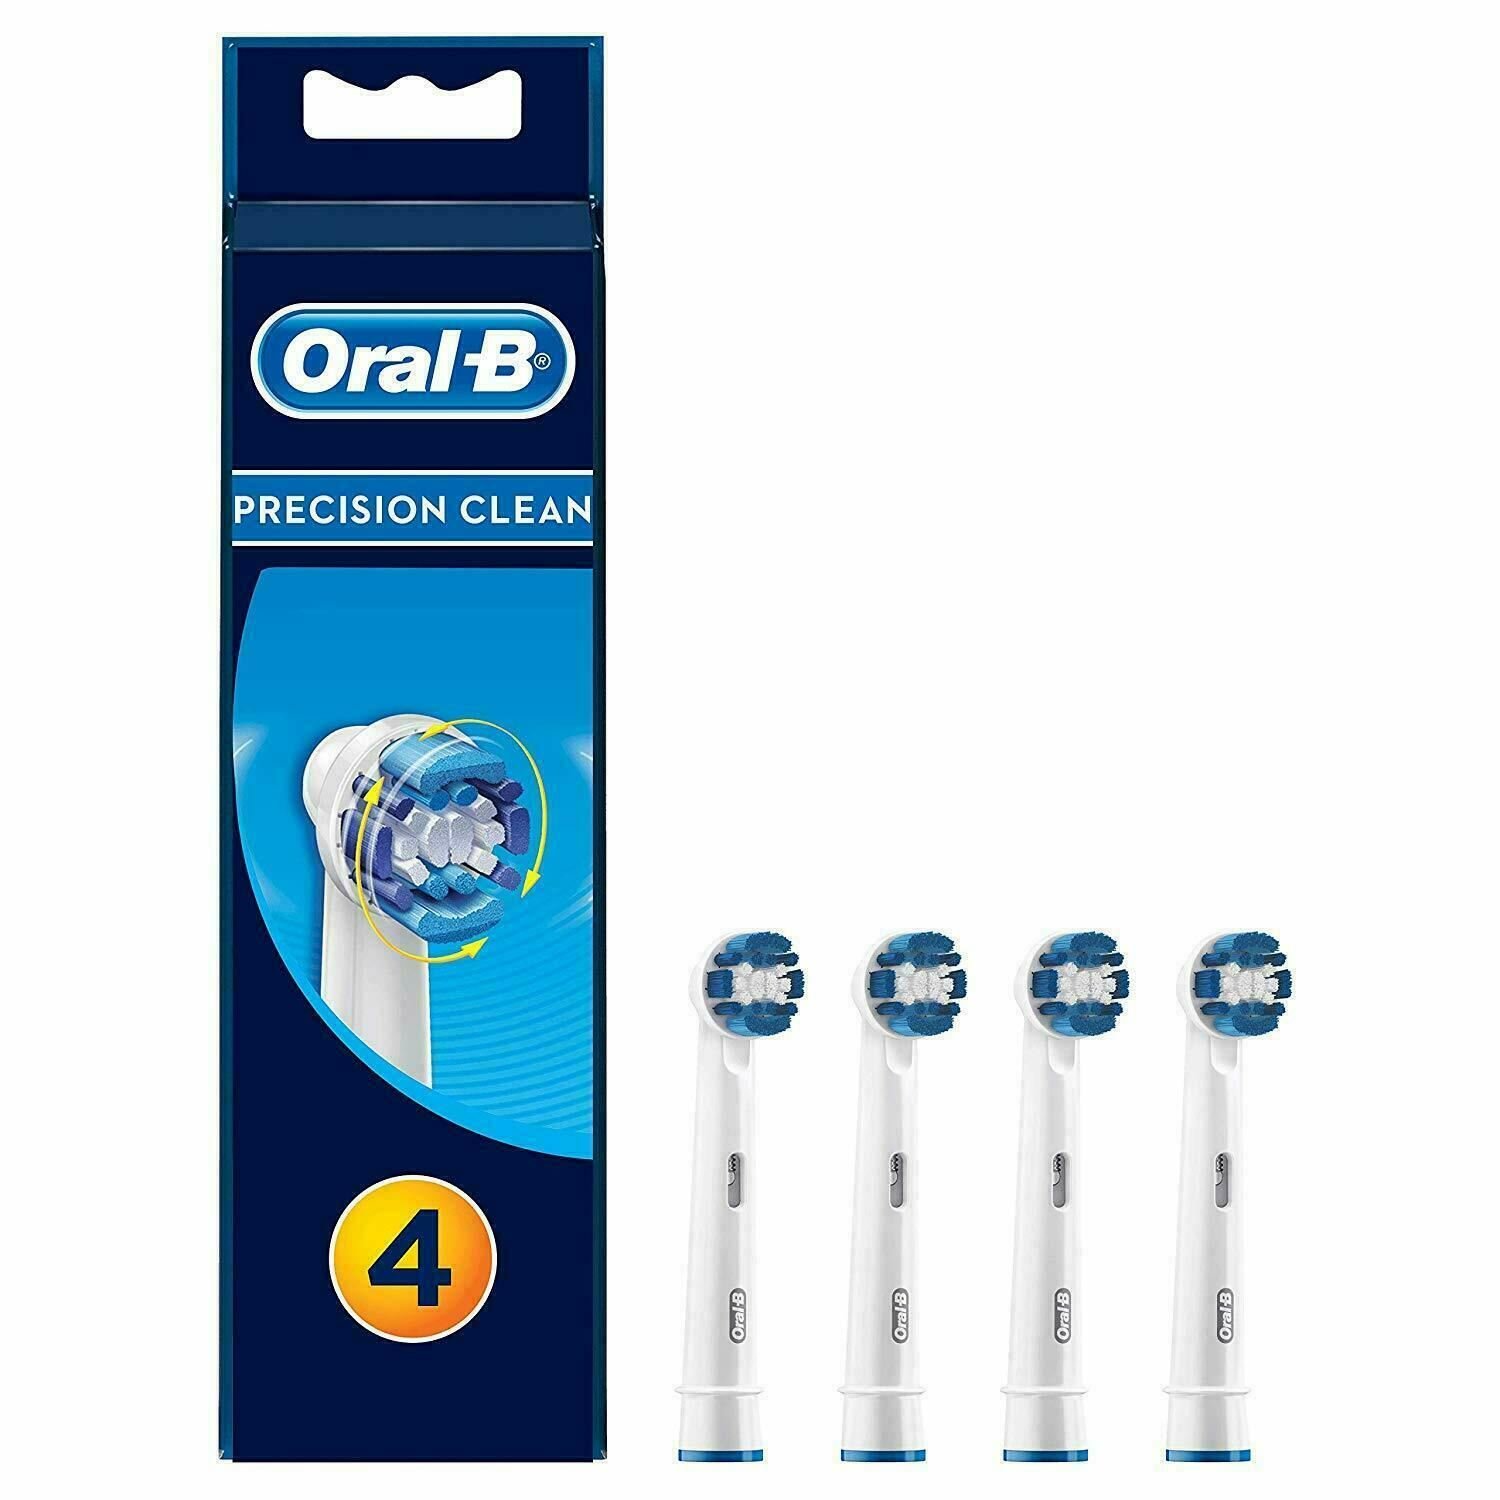 Oral-B Precision Clean Toothbrush Heads Replacement Refills 4 Pack